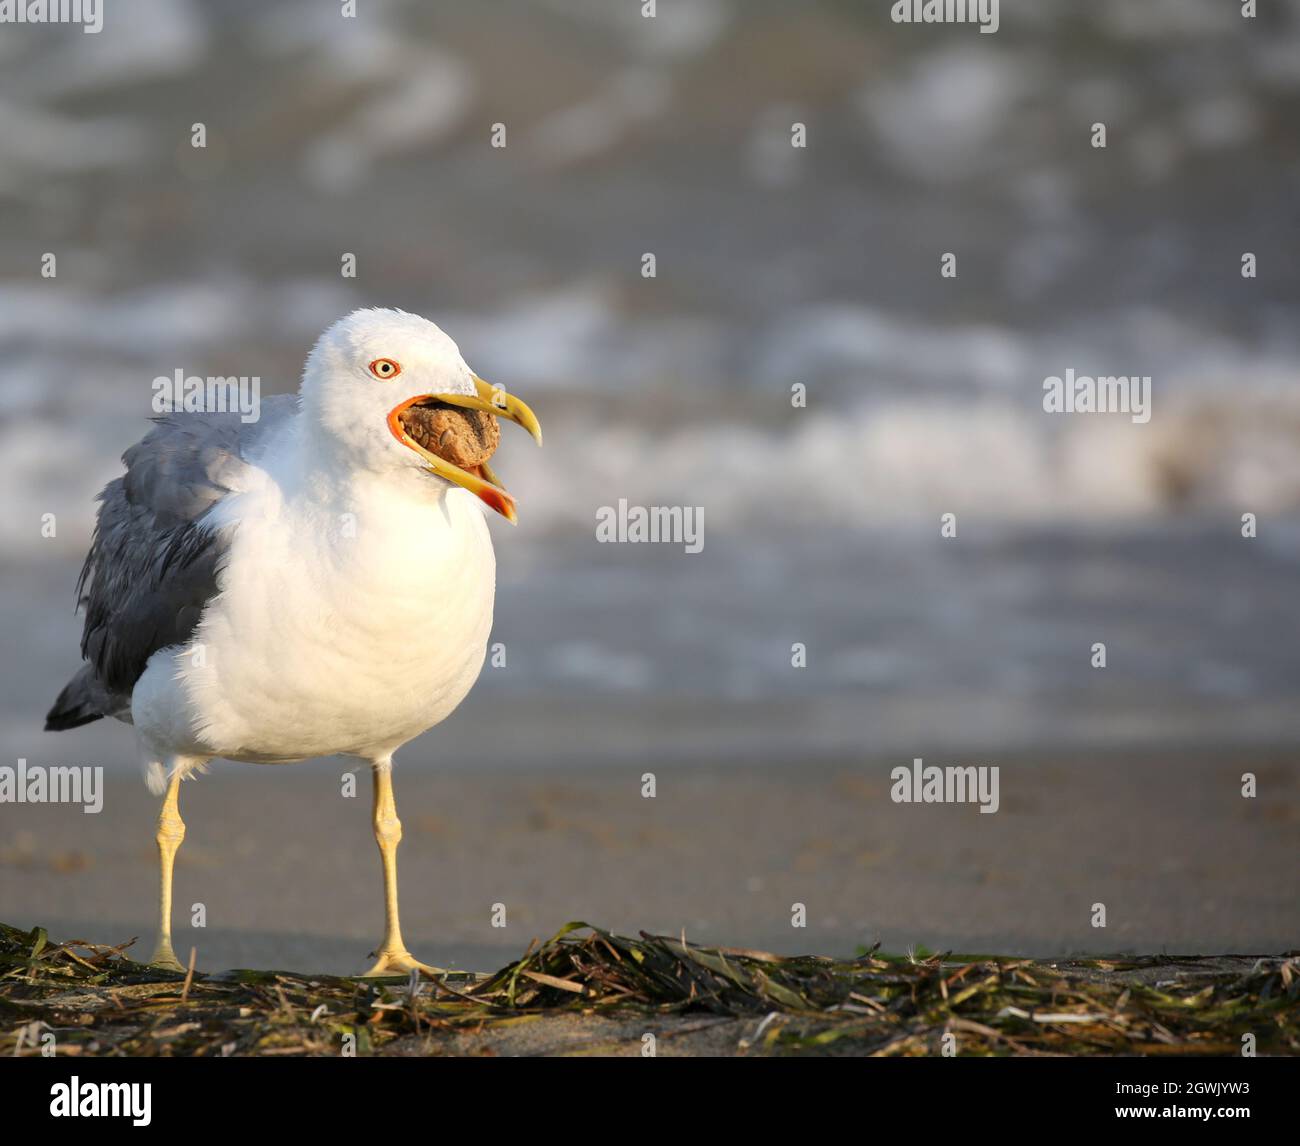 Bird Seagull In Summer By The Mediterranean Seaon The Beach With Opened Beak Stock Photo